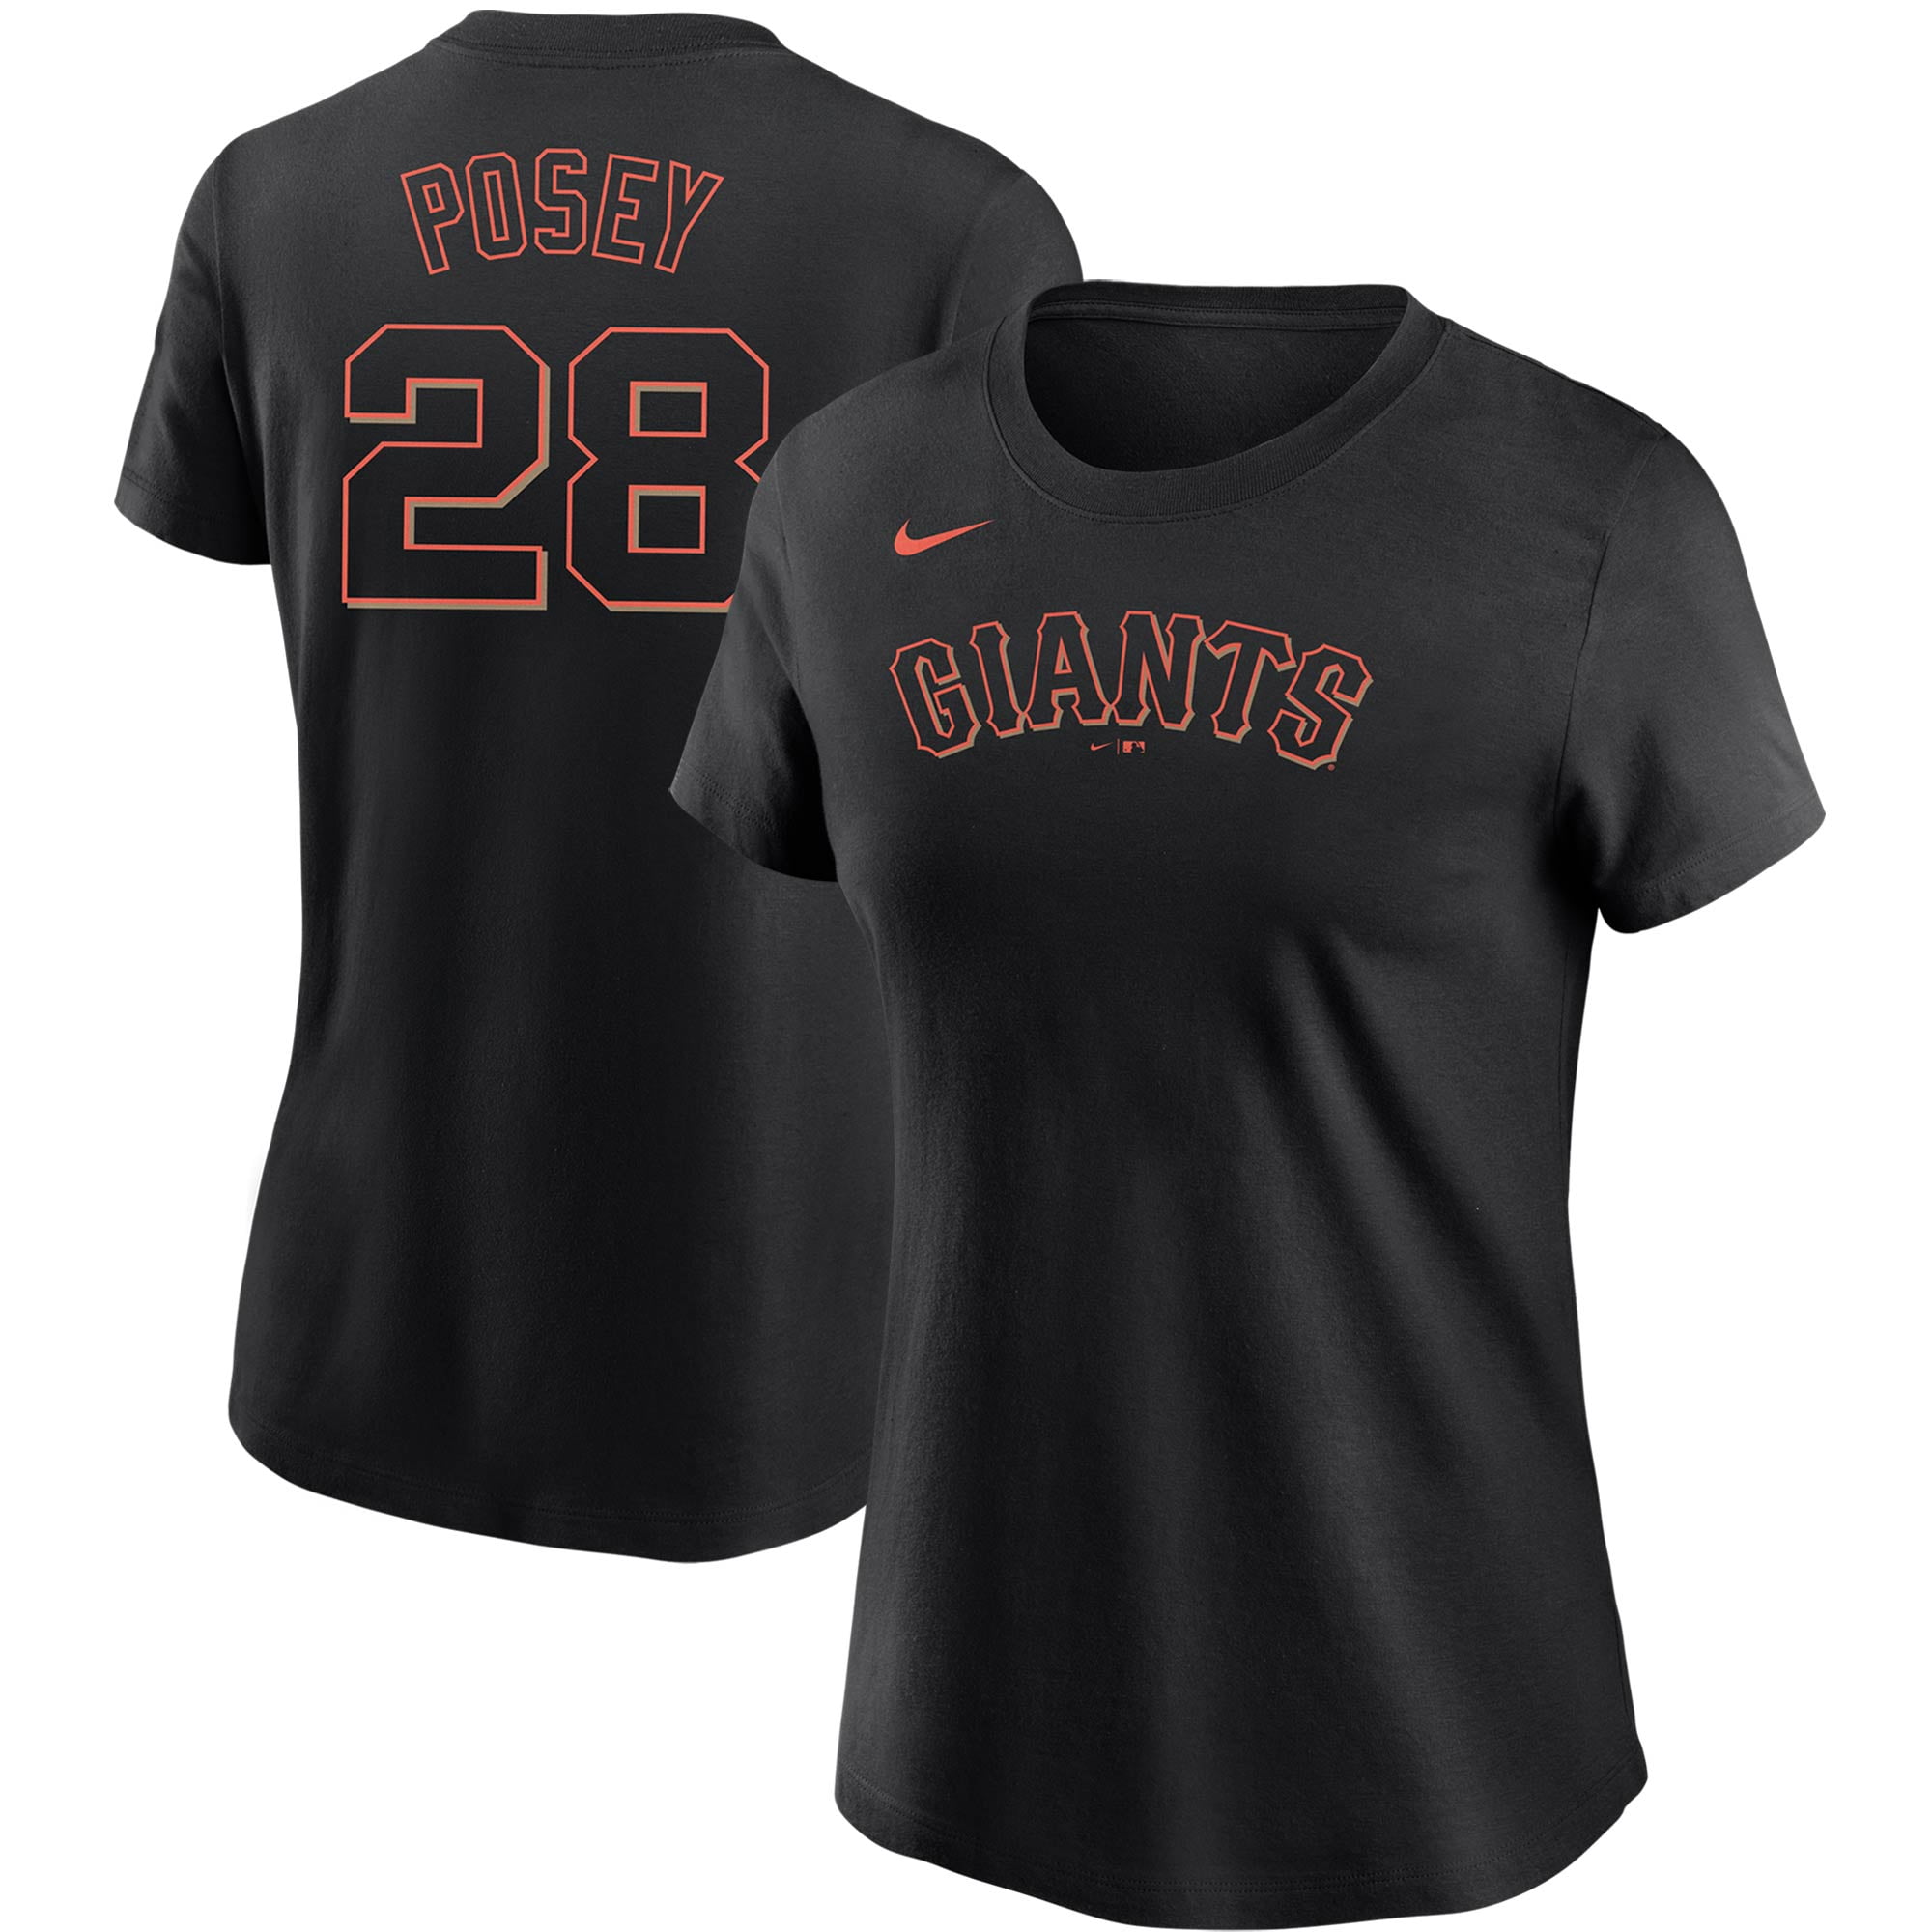 buster posey women's jersey